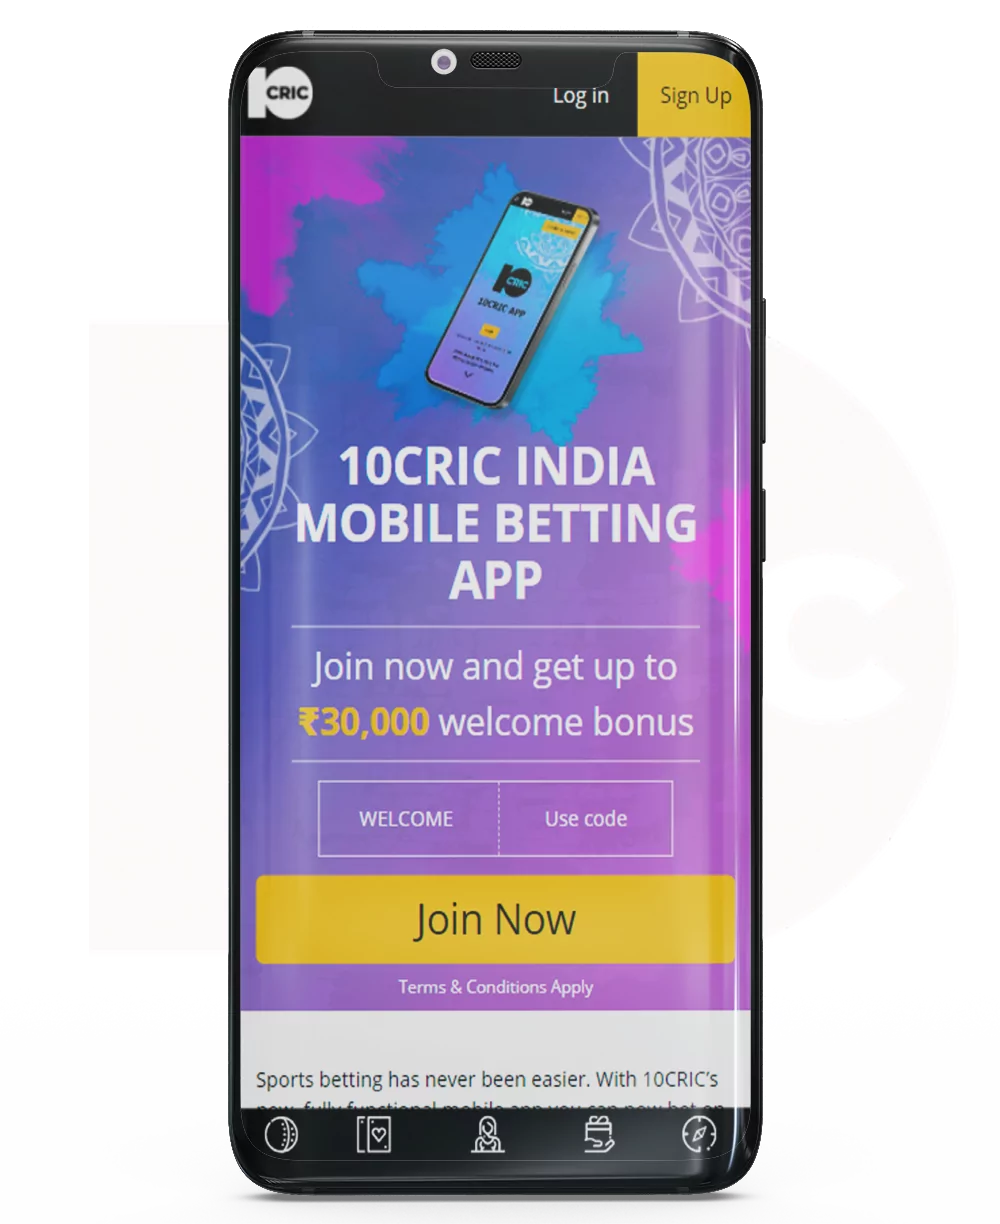 Learn more about betting via the 10CRIC mobile app.